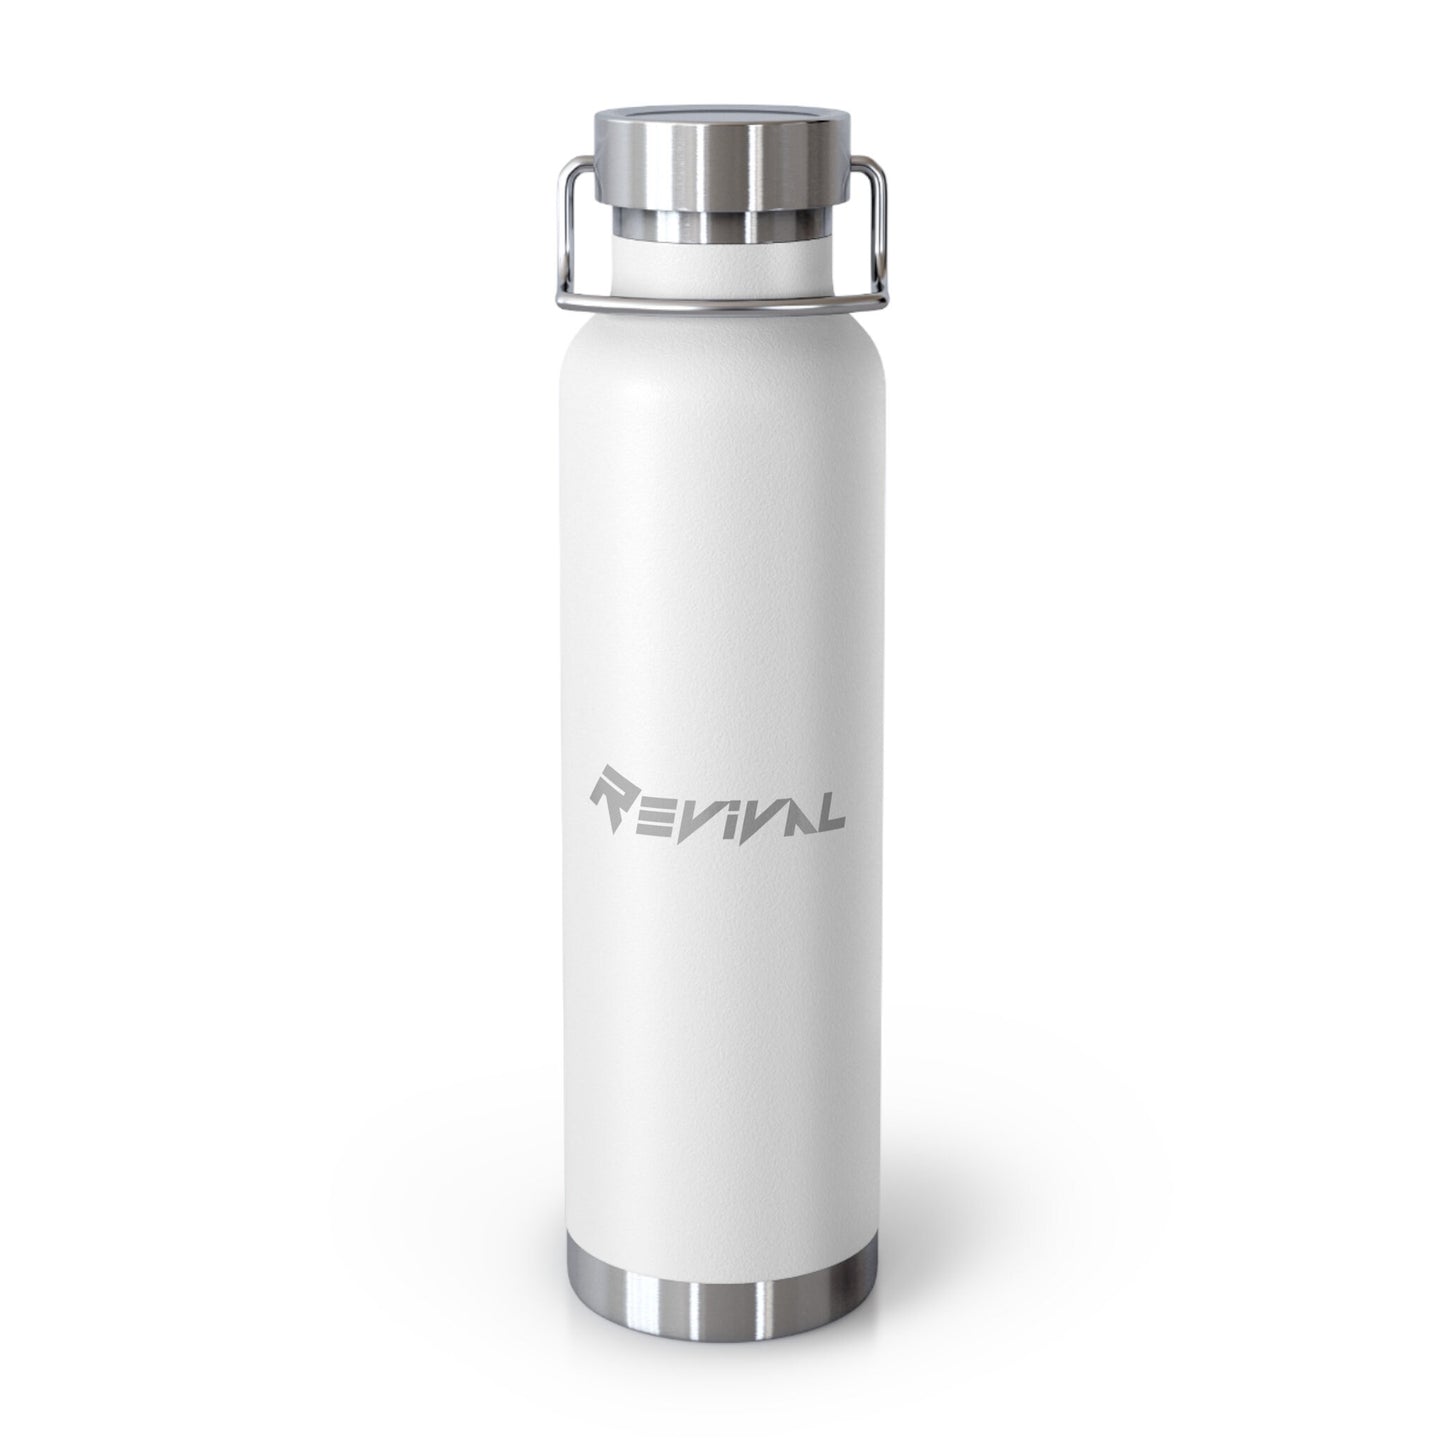 Revival Logo Copper Vacuum Insulated Bottle, 22oz, Flask, Thermos, Container, Insulated cup, Hot or Cold liquid Drinkware